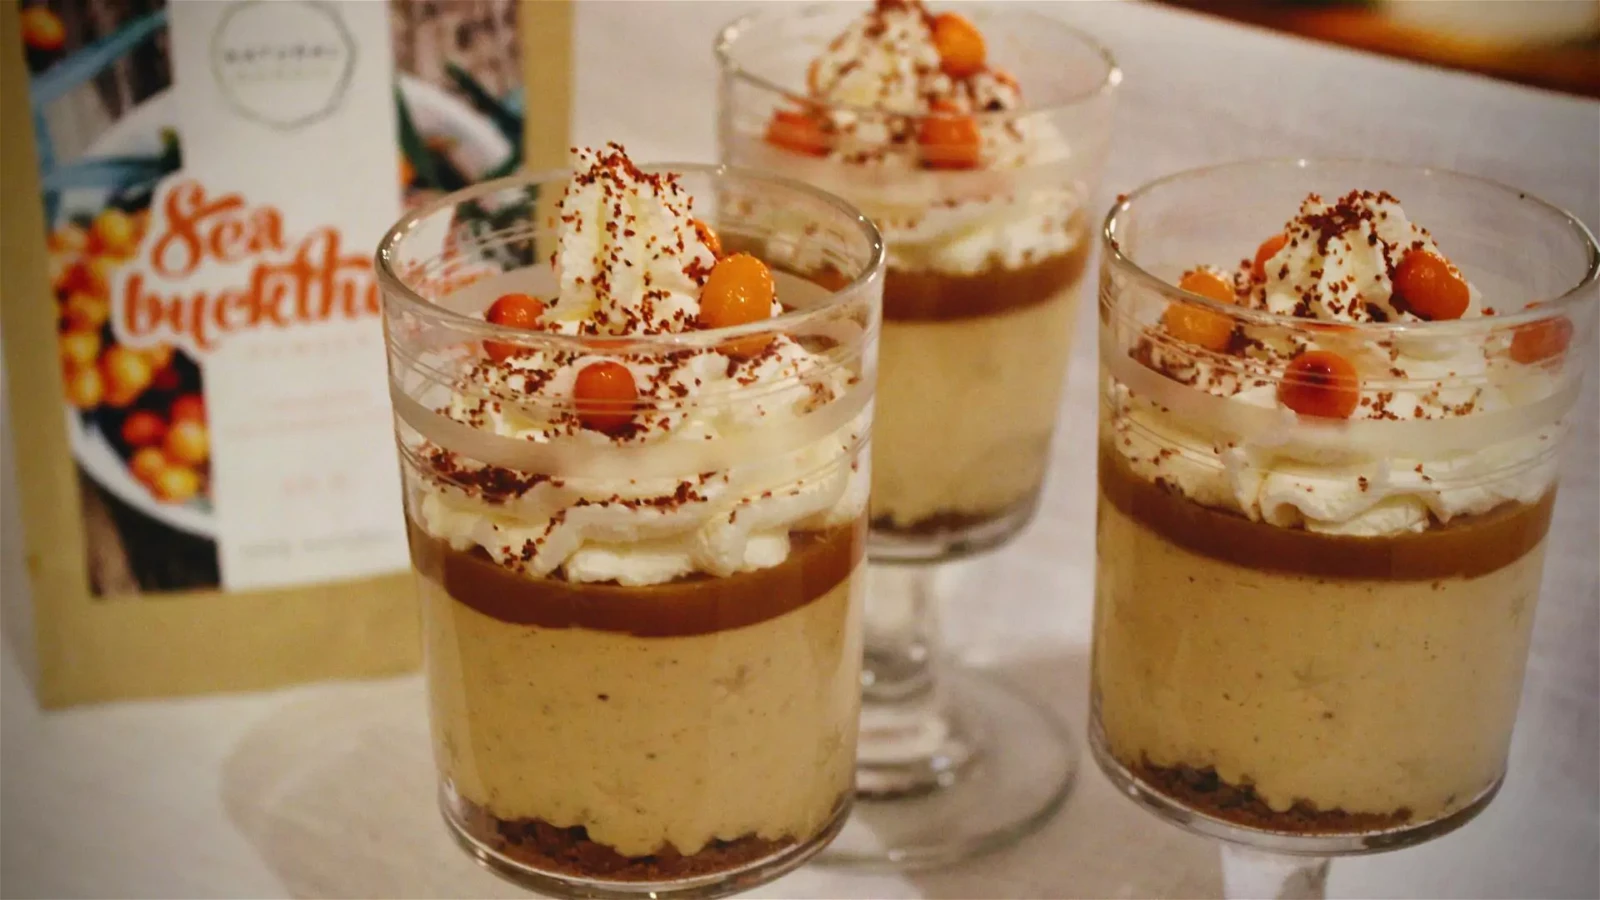 Image of Sea buckthorn cheesecake in a glass